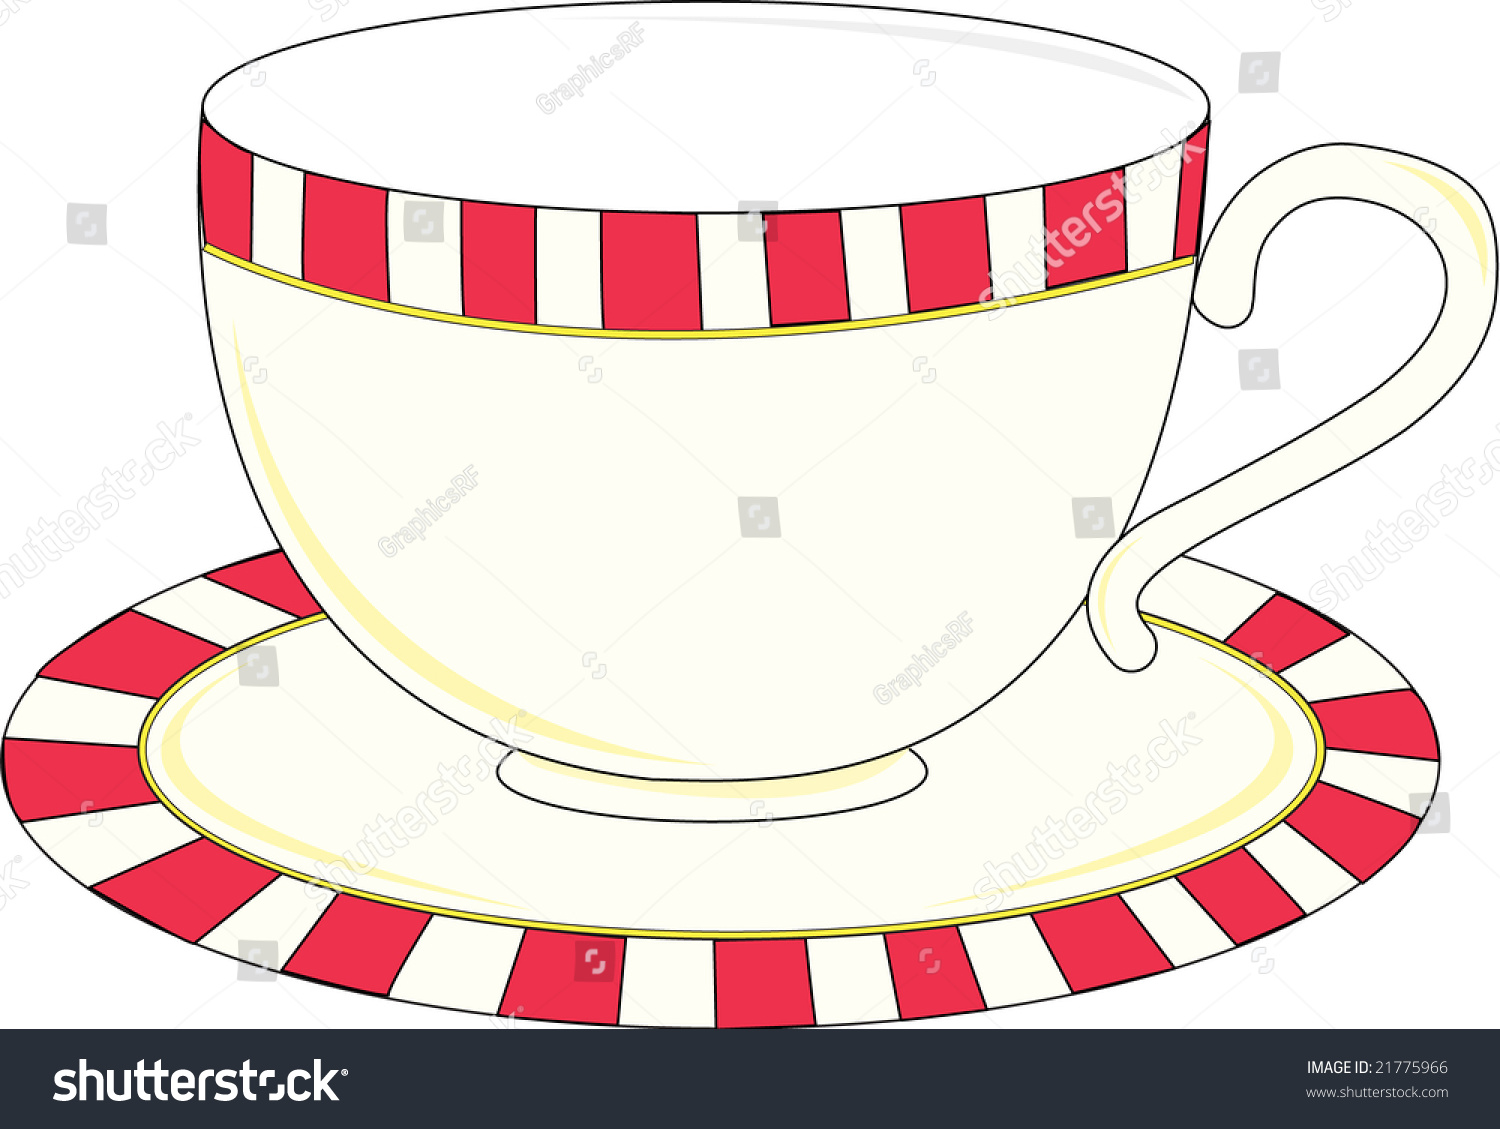 clipart cup and saucer - photo #49